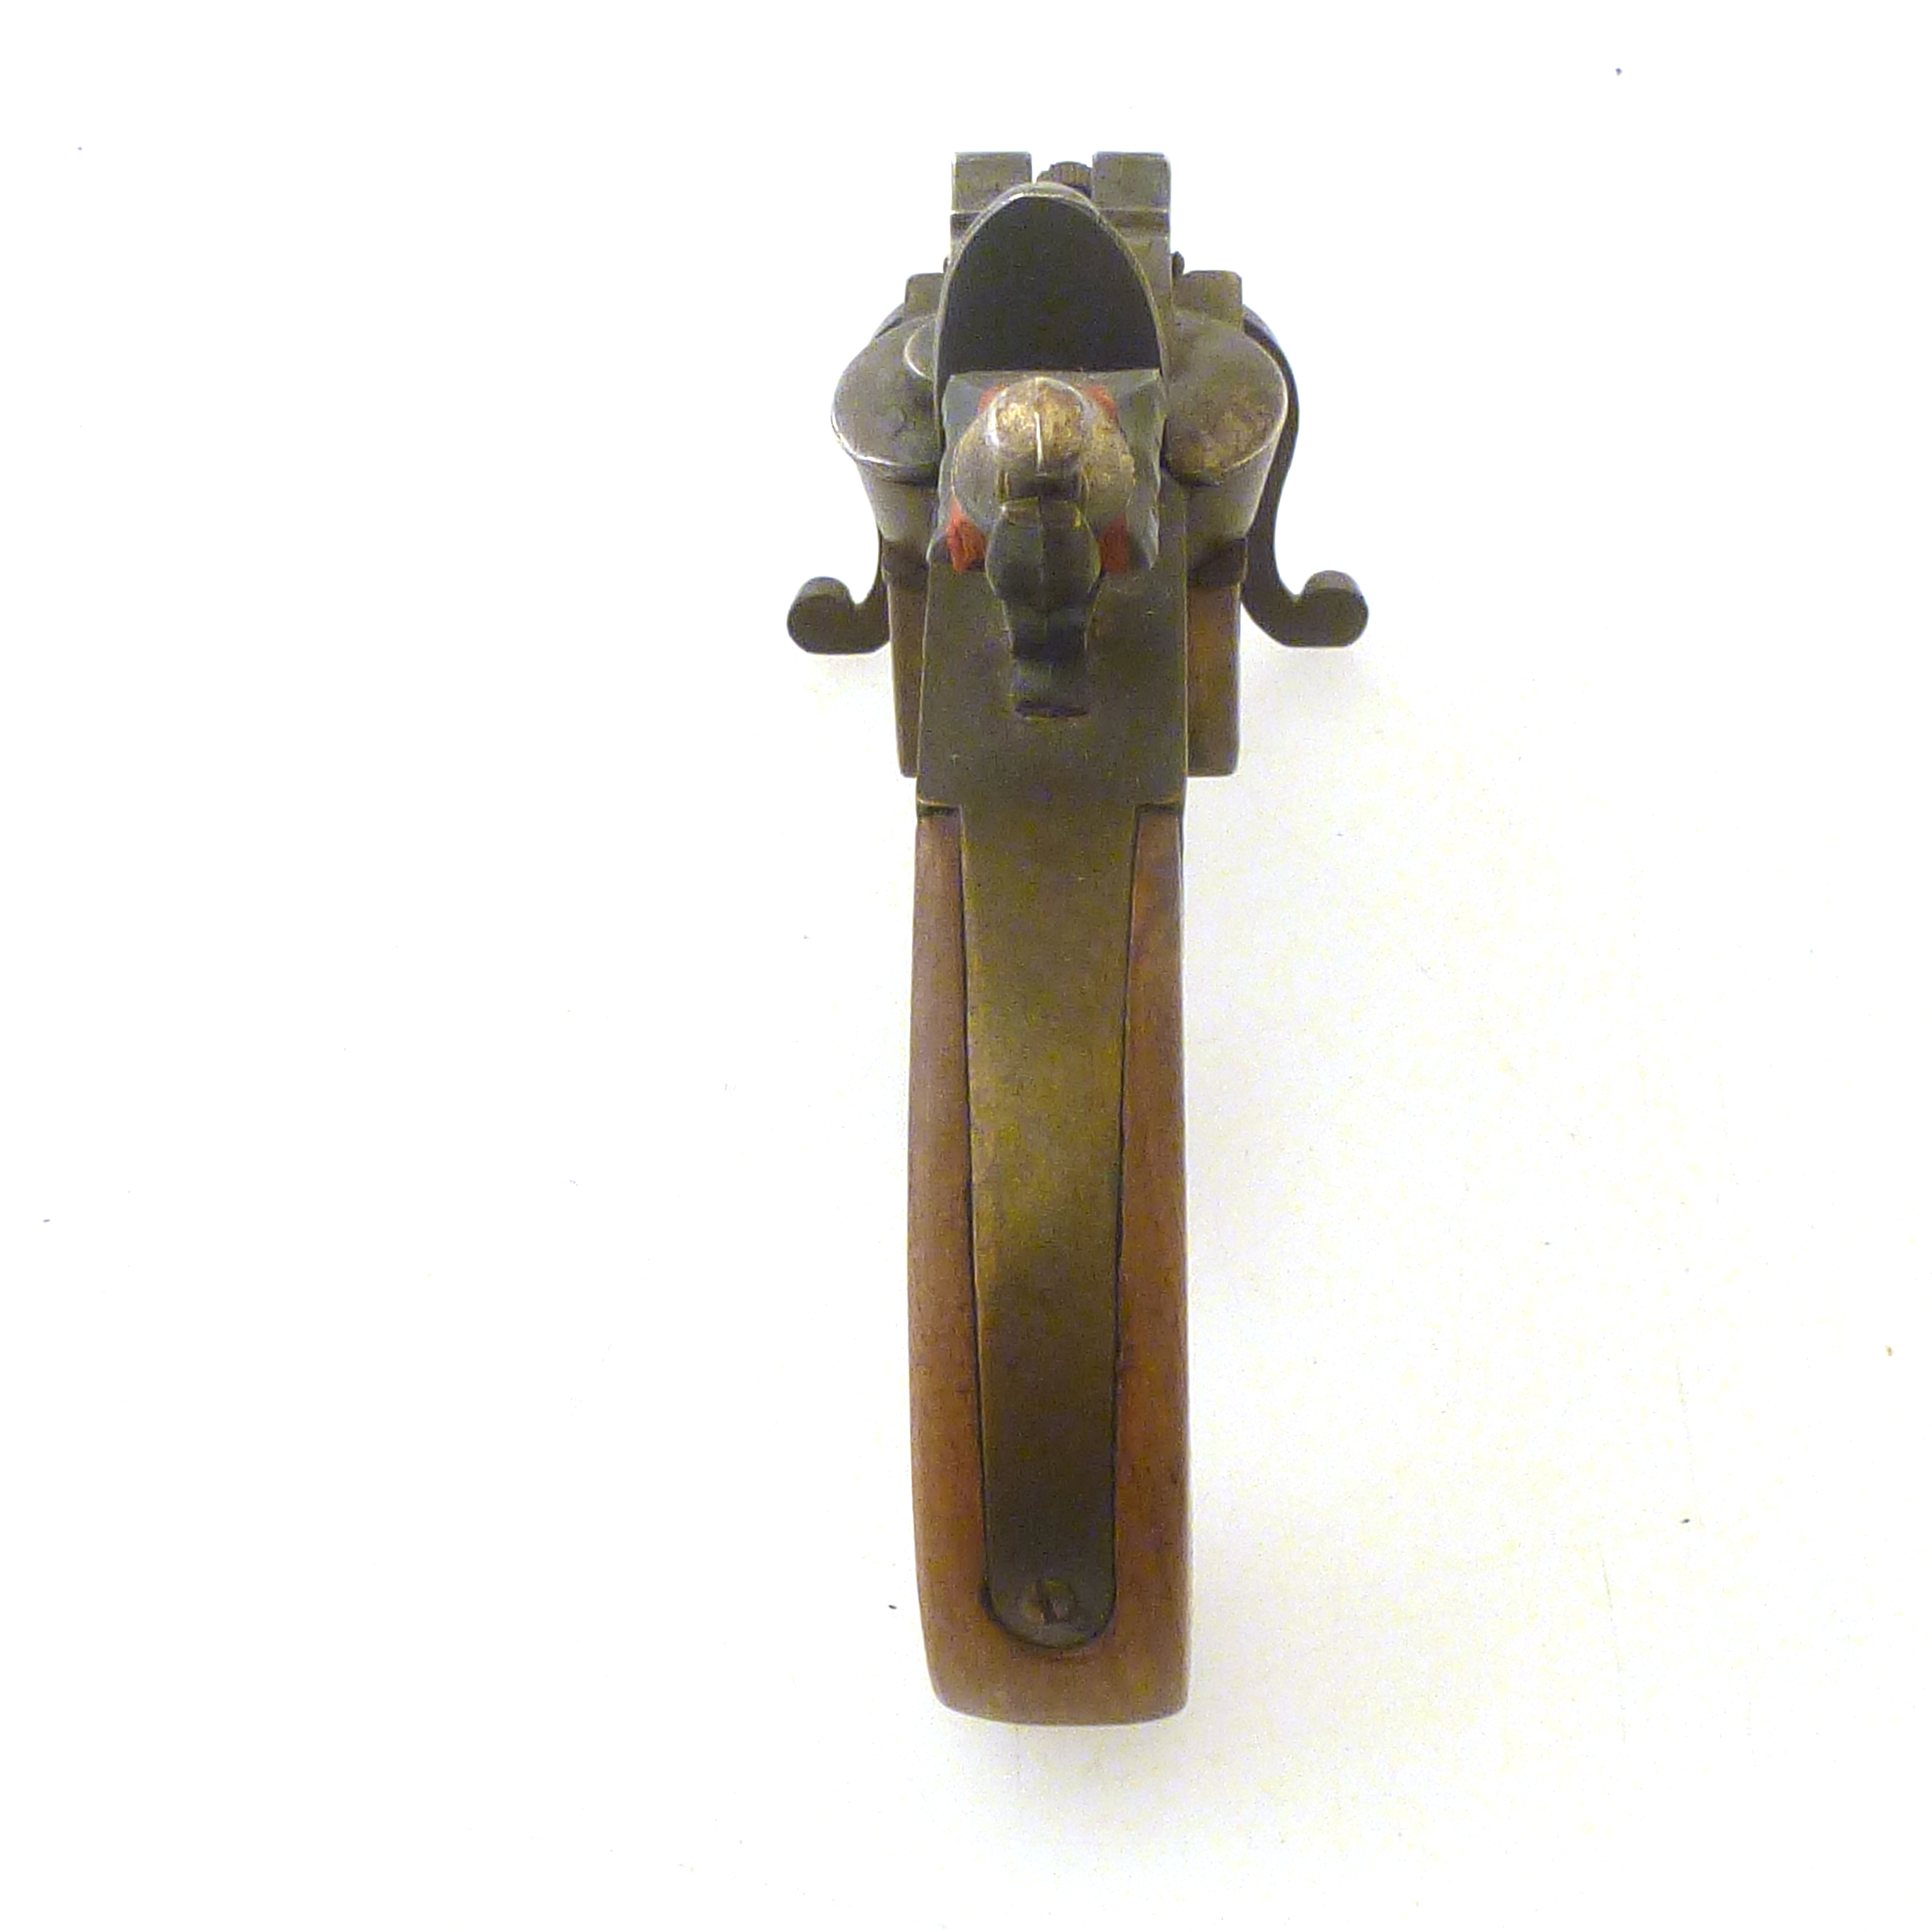 DUNHILL TINDER PISTOL TABLE LIGHTER - Image 5 of 6